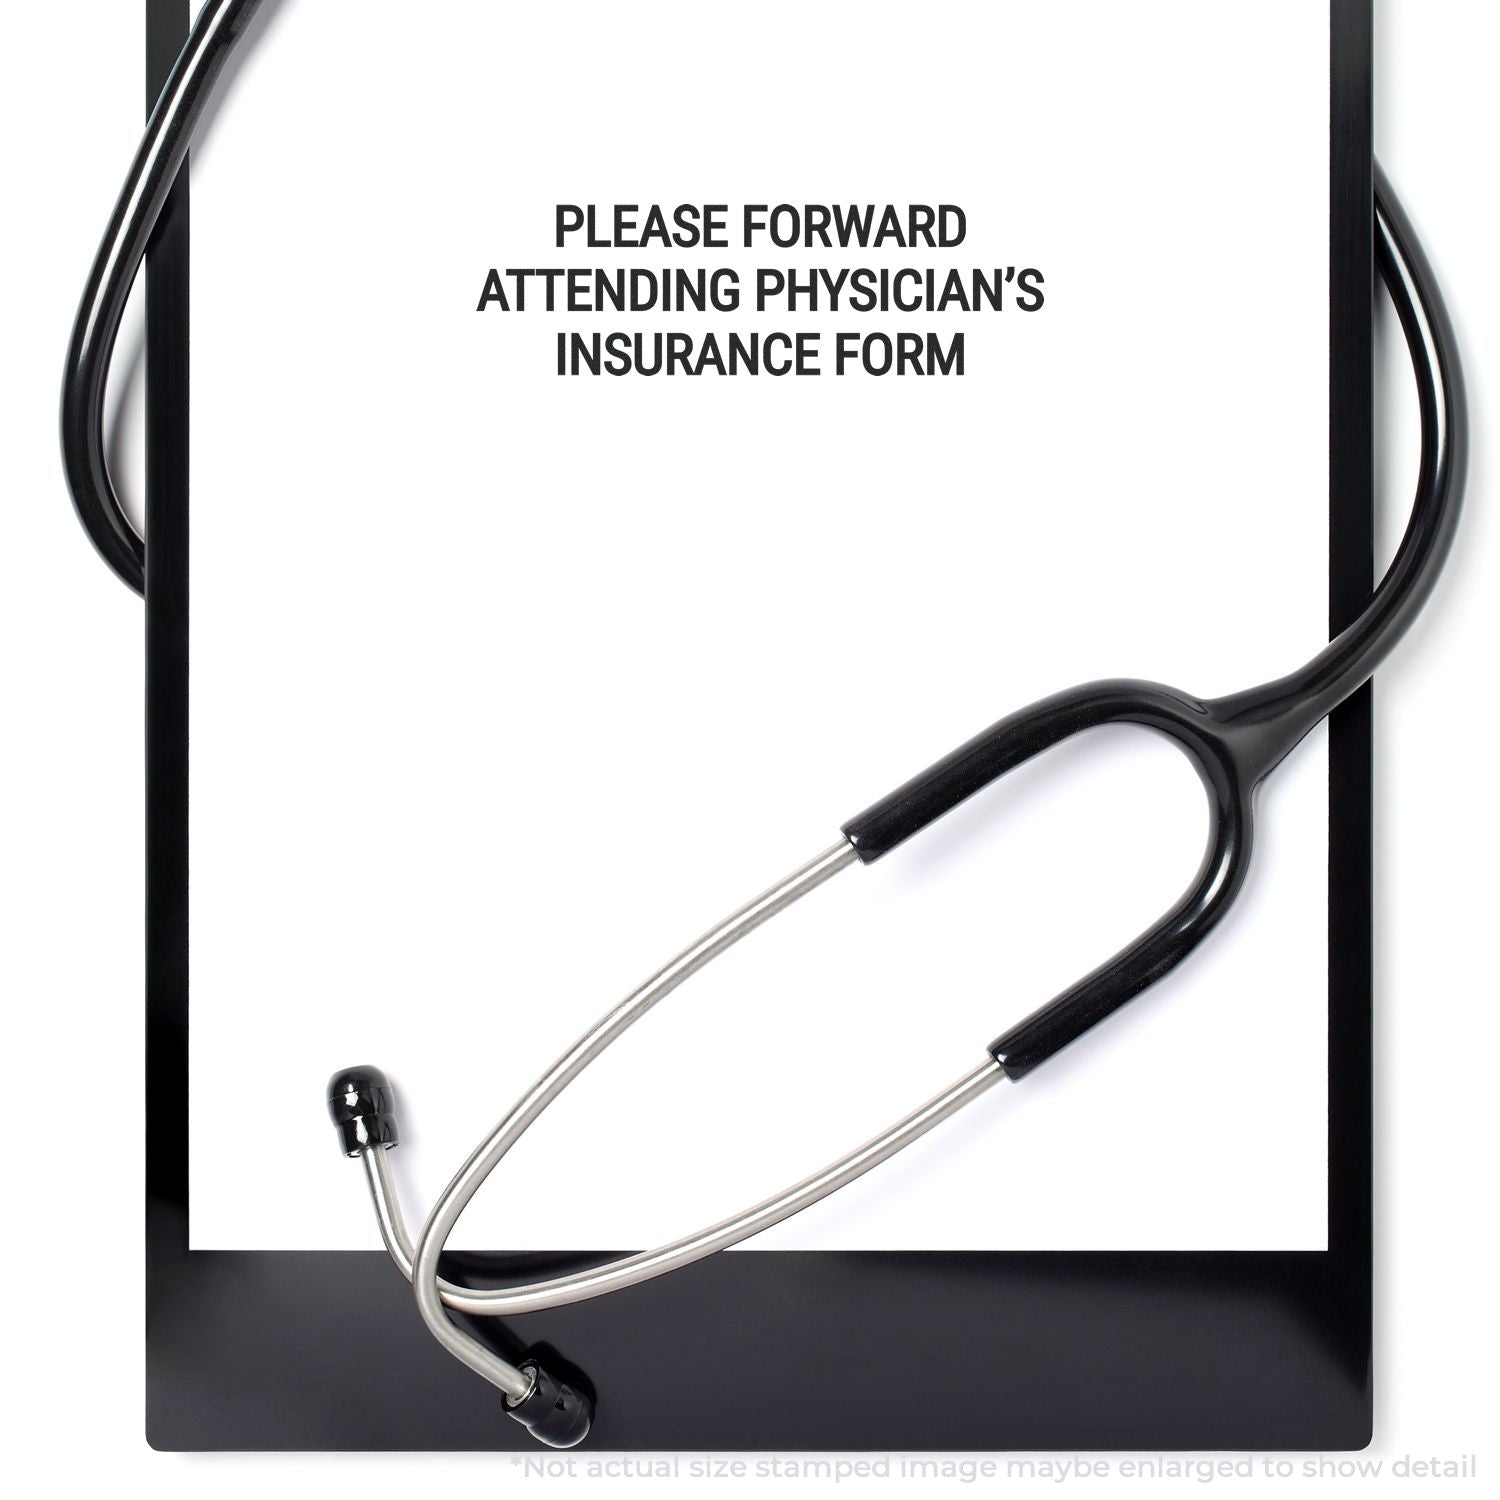 A self-inking stamp with a stamped image showing how the text "PLEASE FORWARD ATTENDING PHYSICIAN'S INSURANCE FORM" is displayed after stamping.